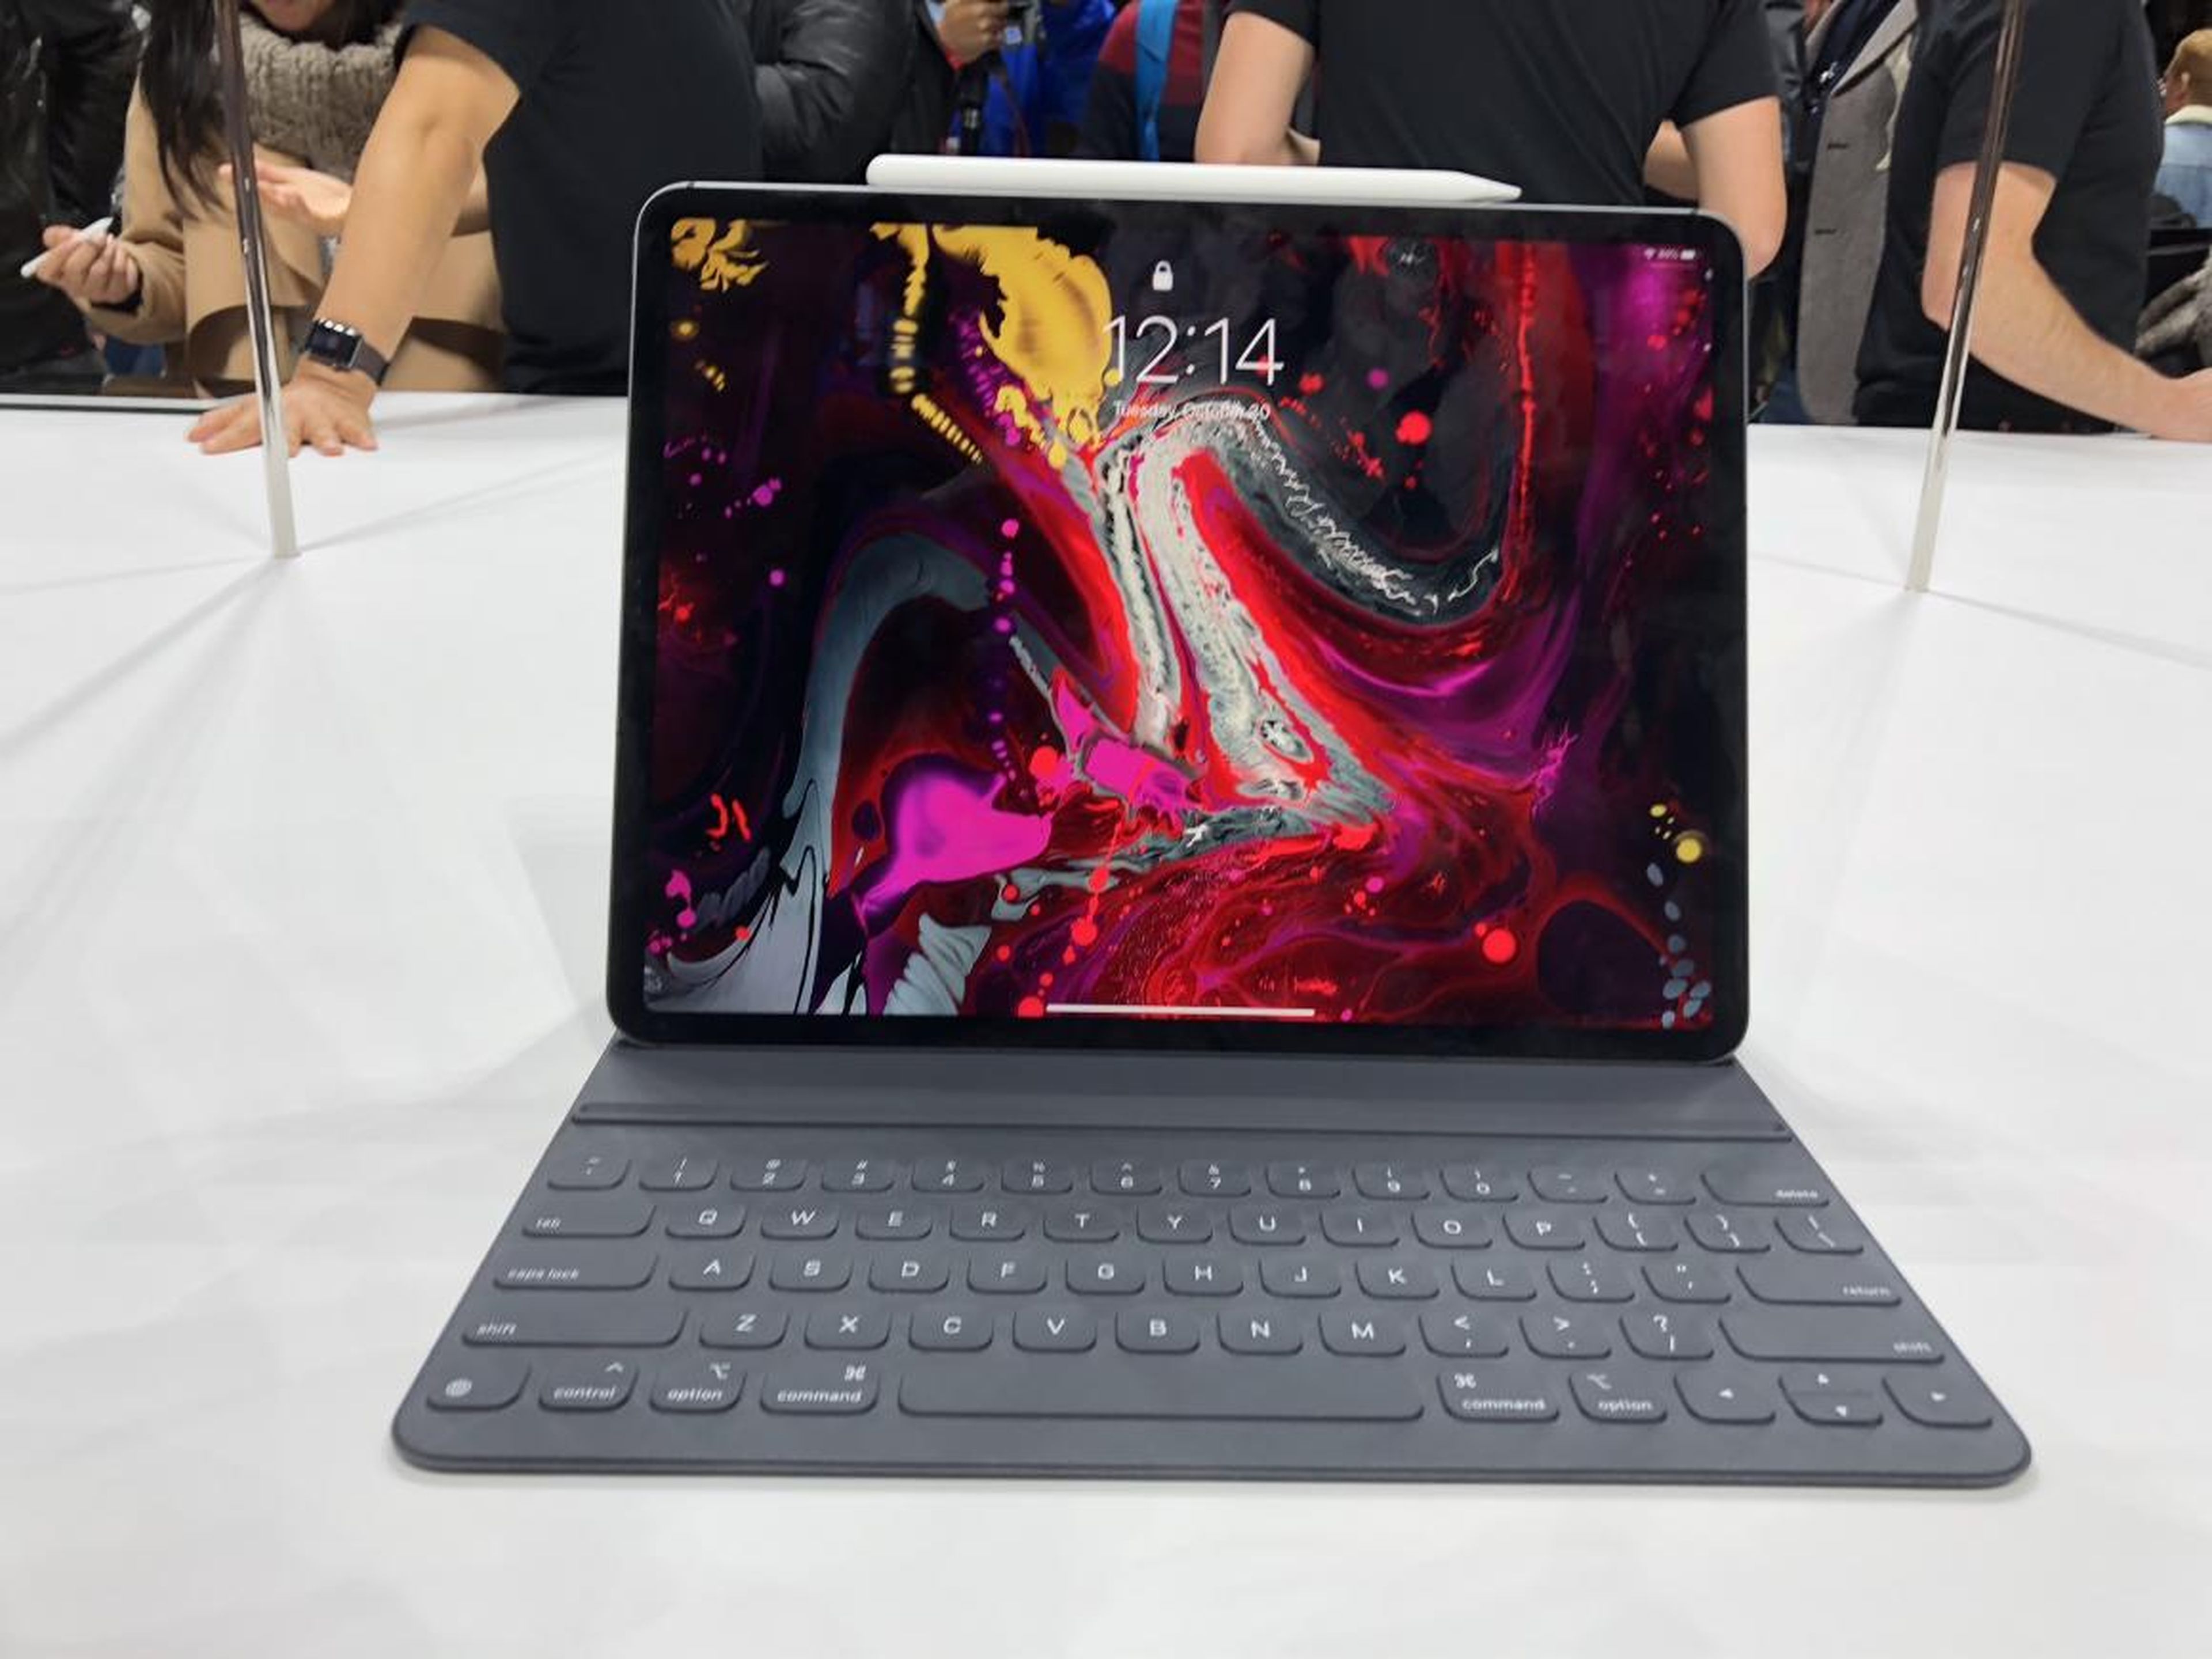 The typing experience is much improved, too. After about a minute of typing on the keyboard, I think it might actually be better than the MacBook. The keys travel and land with a satisfying thud. In this orientation, the iPad Pro